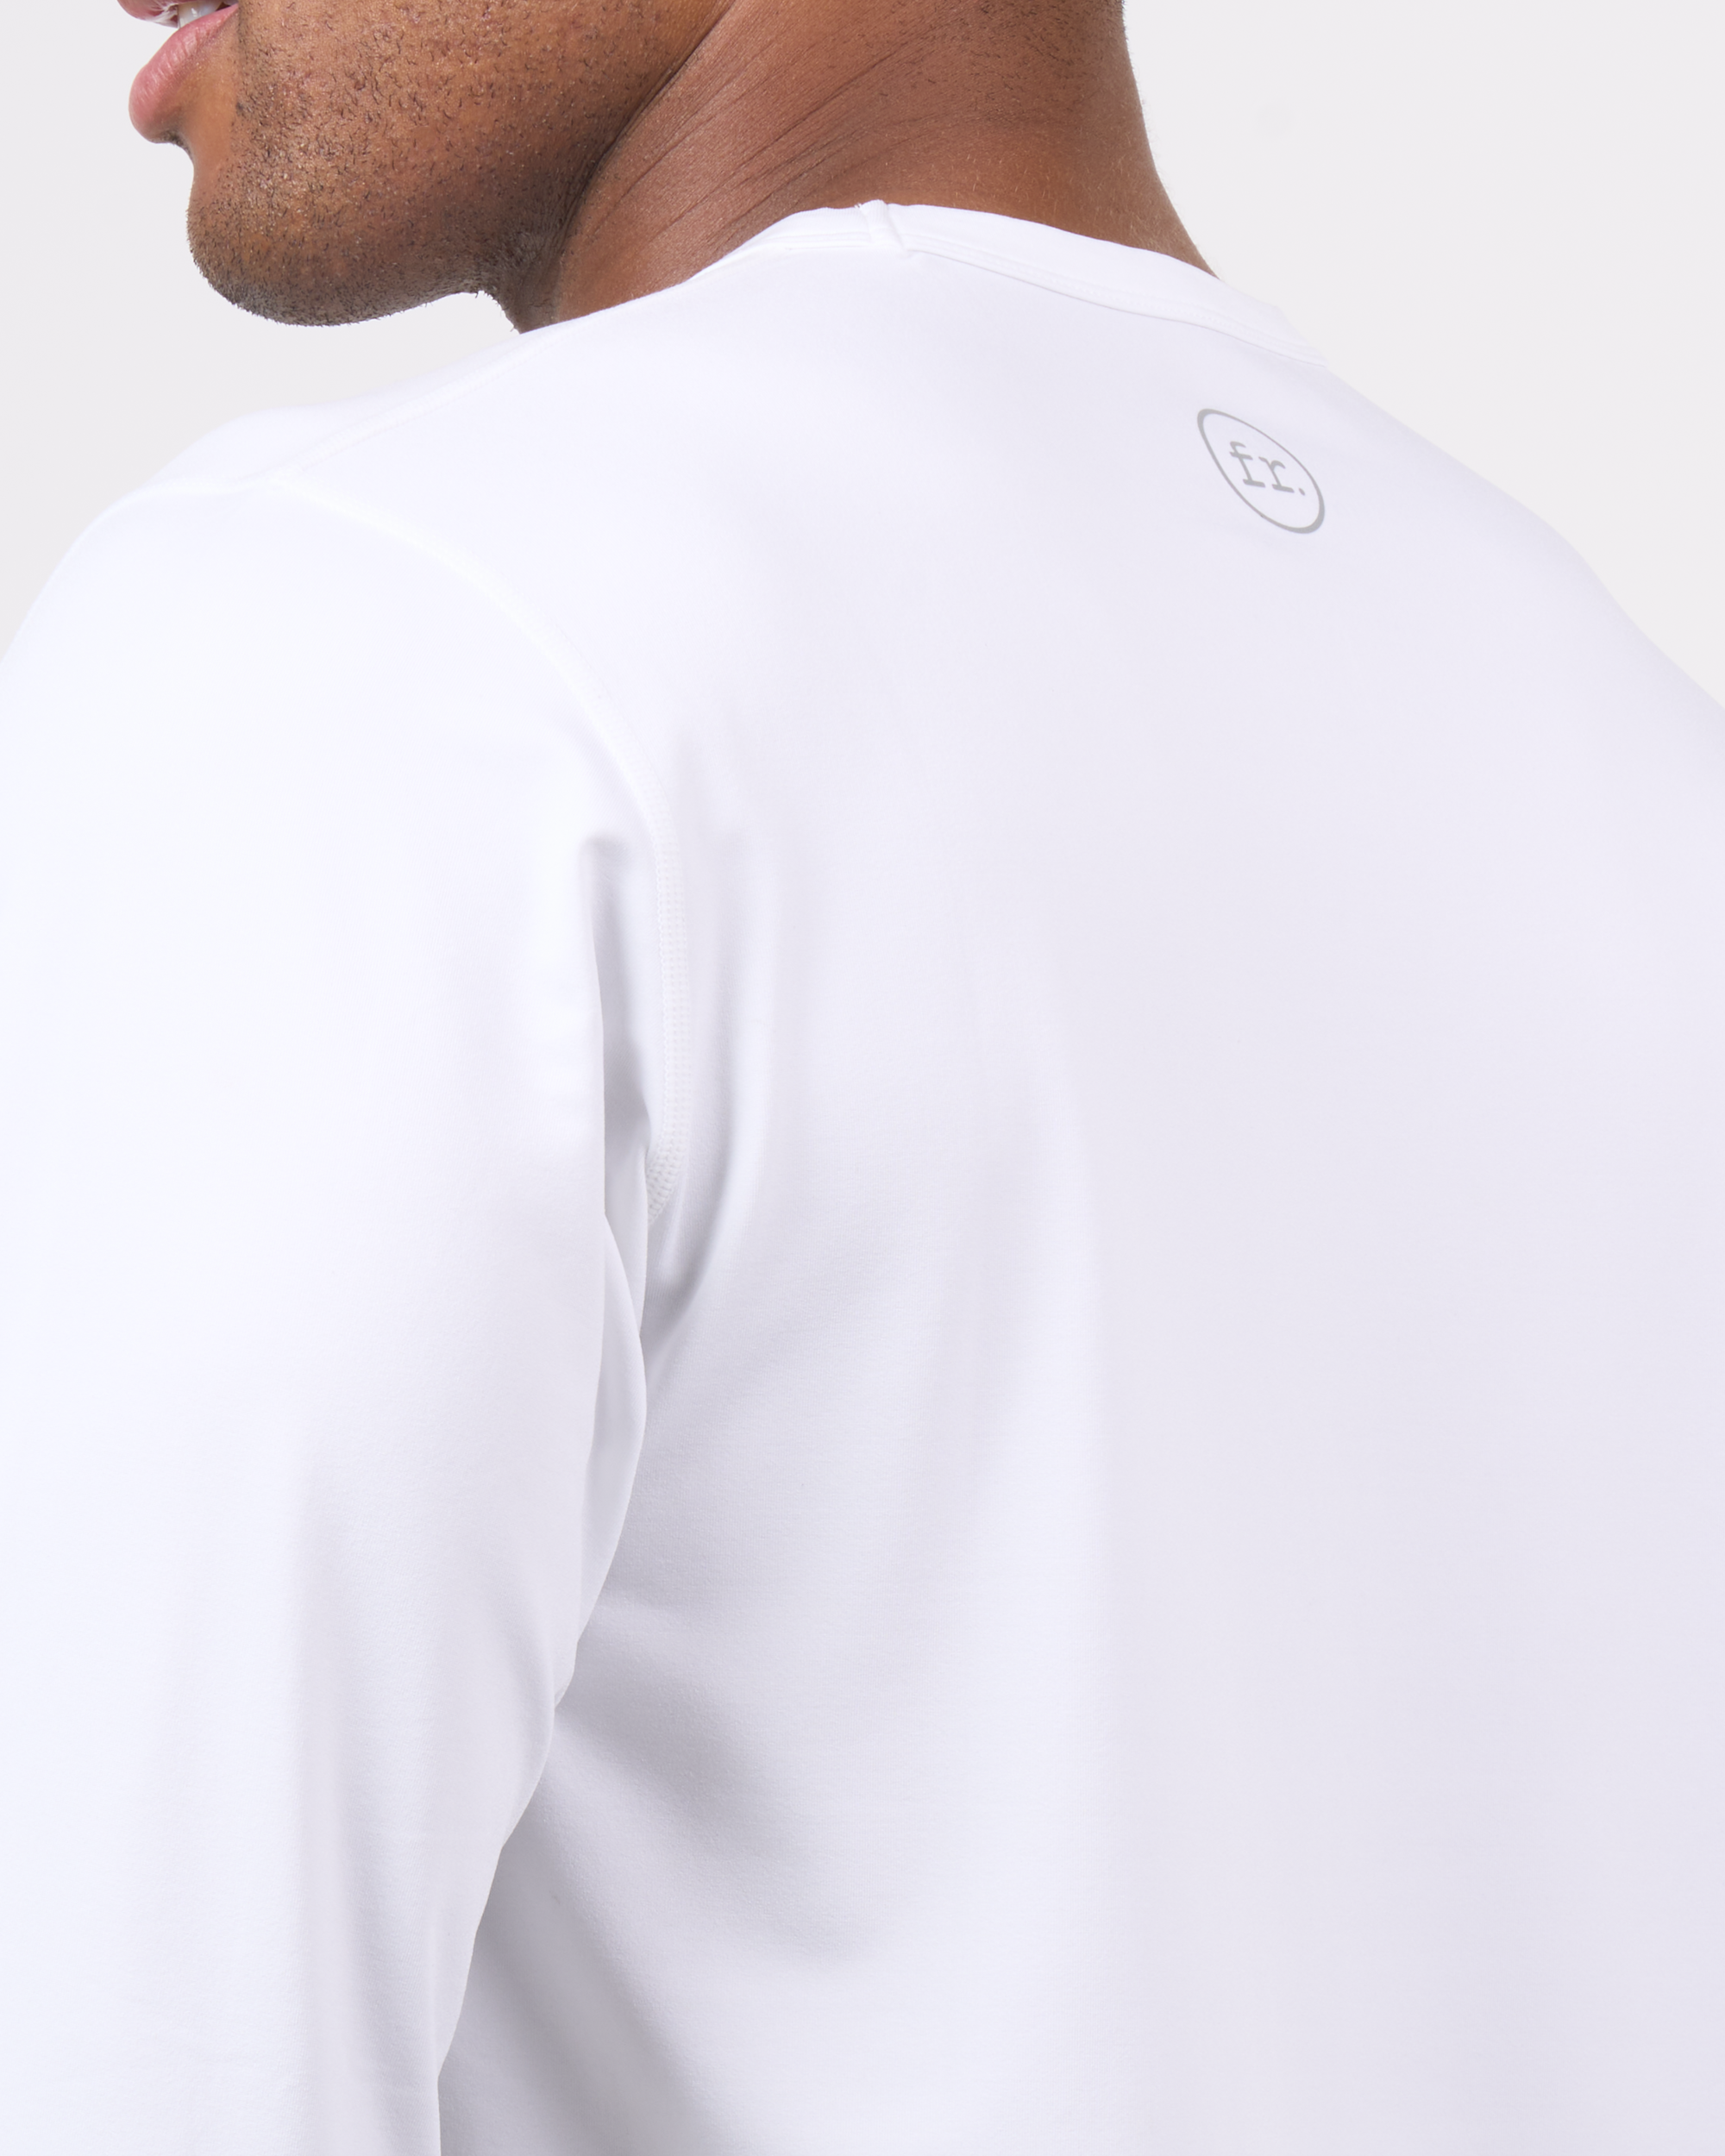 Foreign Rider Co Technical Fabric White Long-Sleeve T-Shirt Shoulder Detail